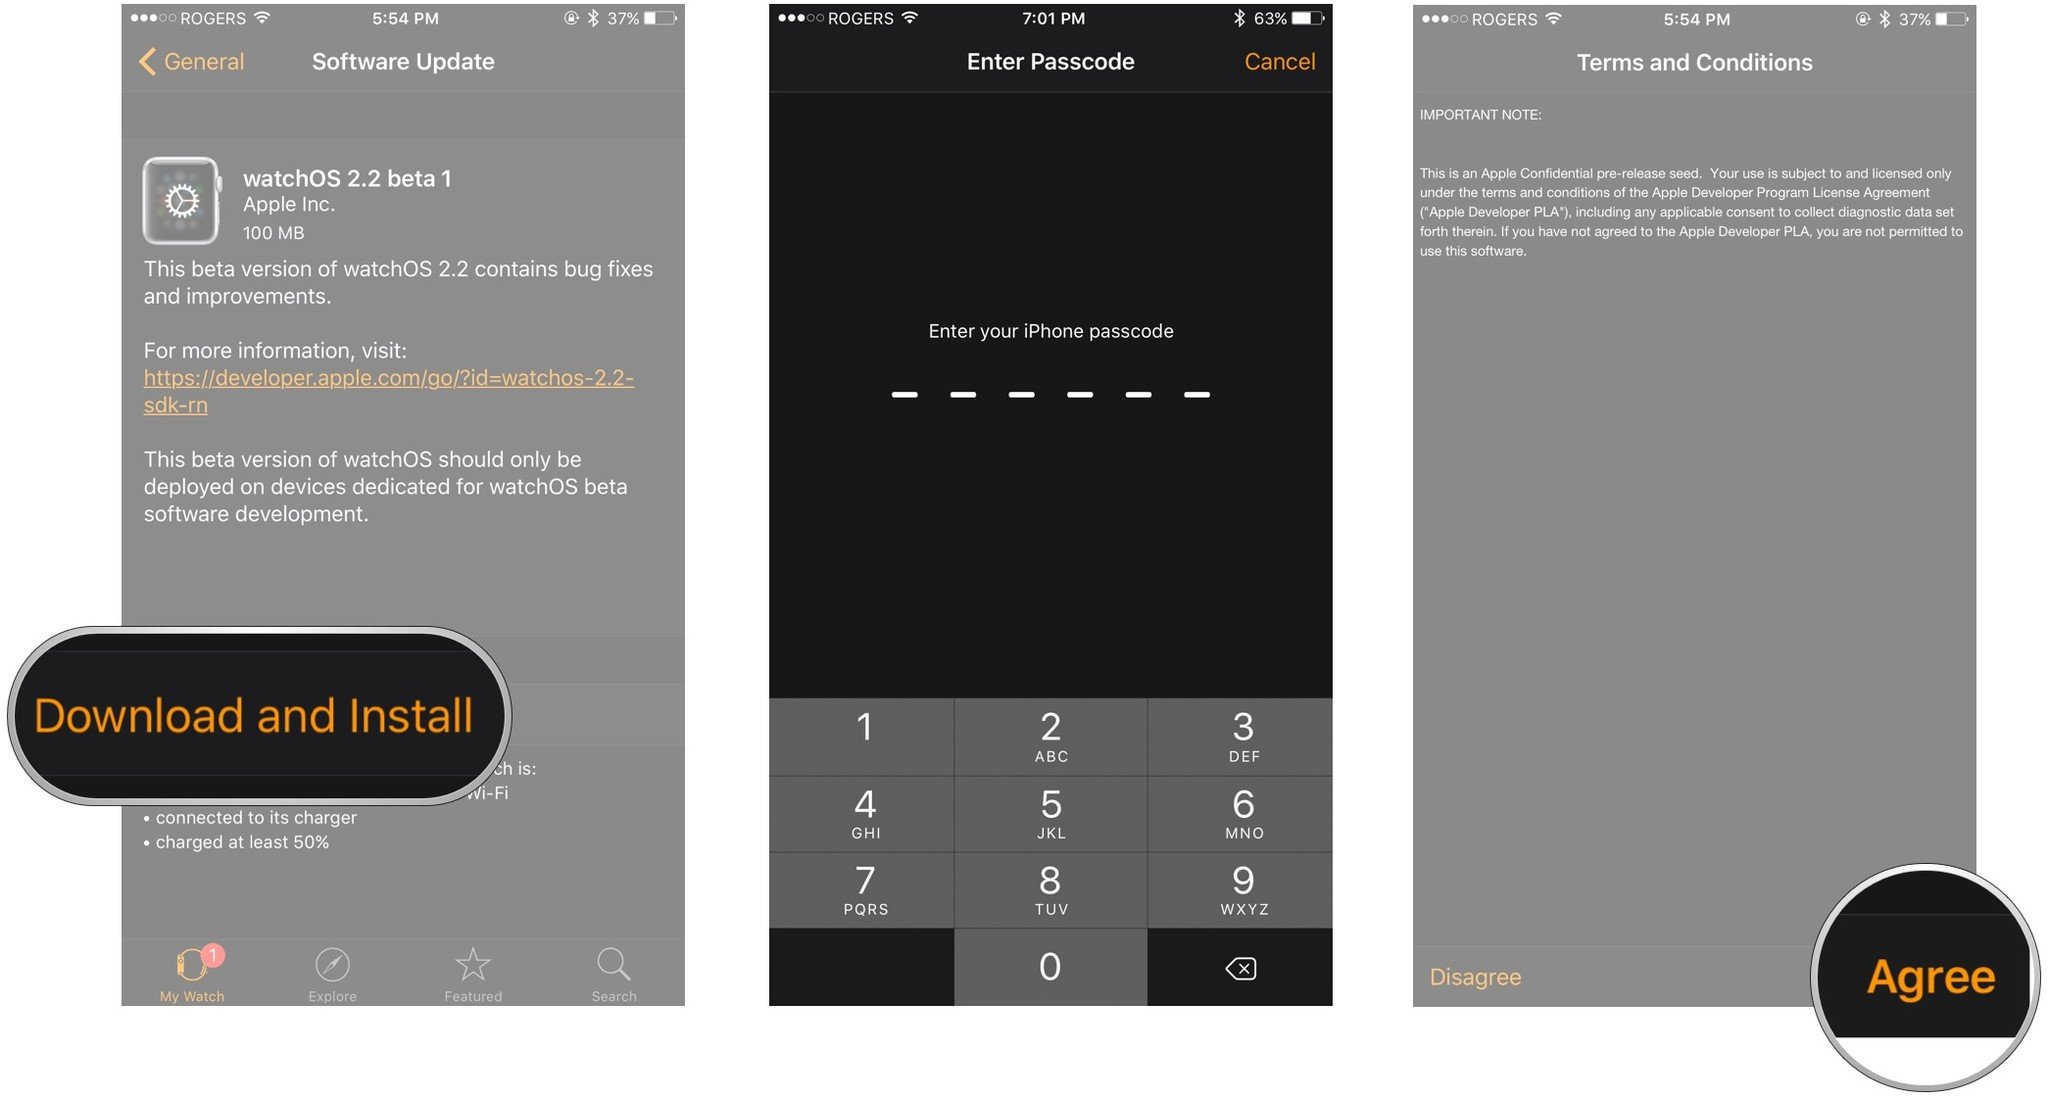 Install watchOS, which shows how to tap Download and Install, enter your iPhone passcode, then tap OK